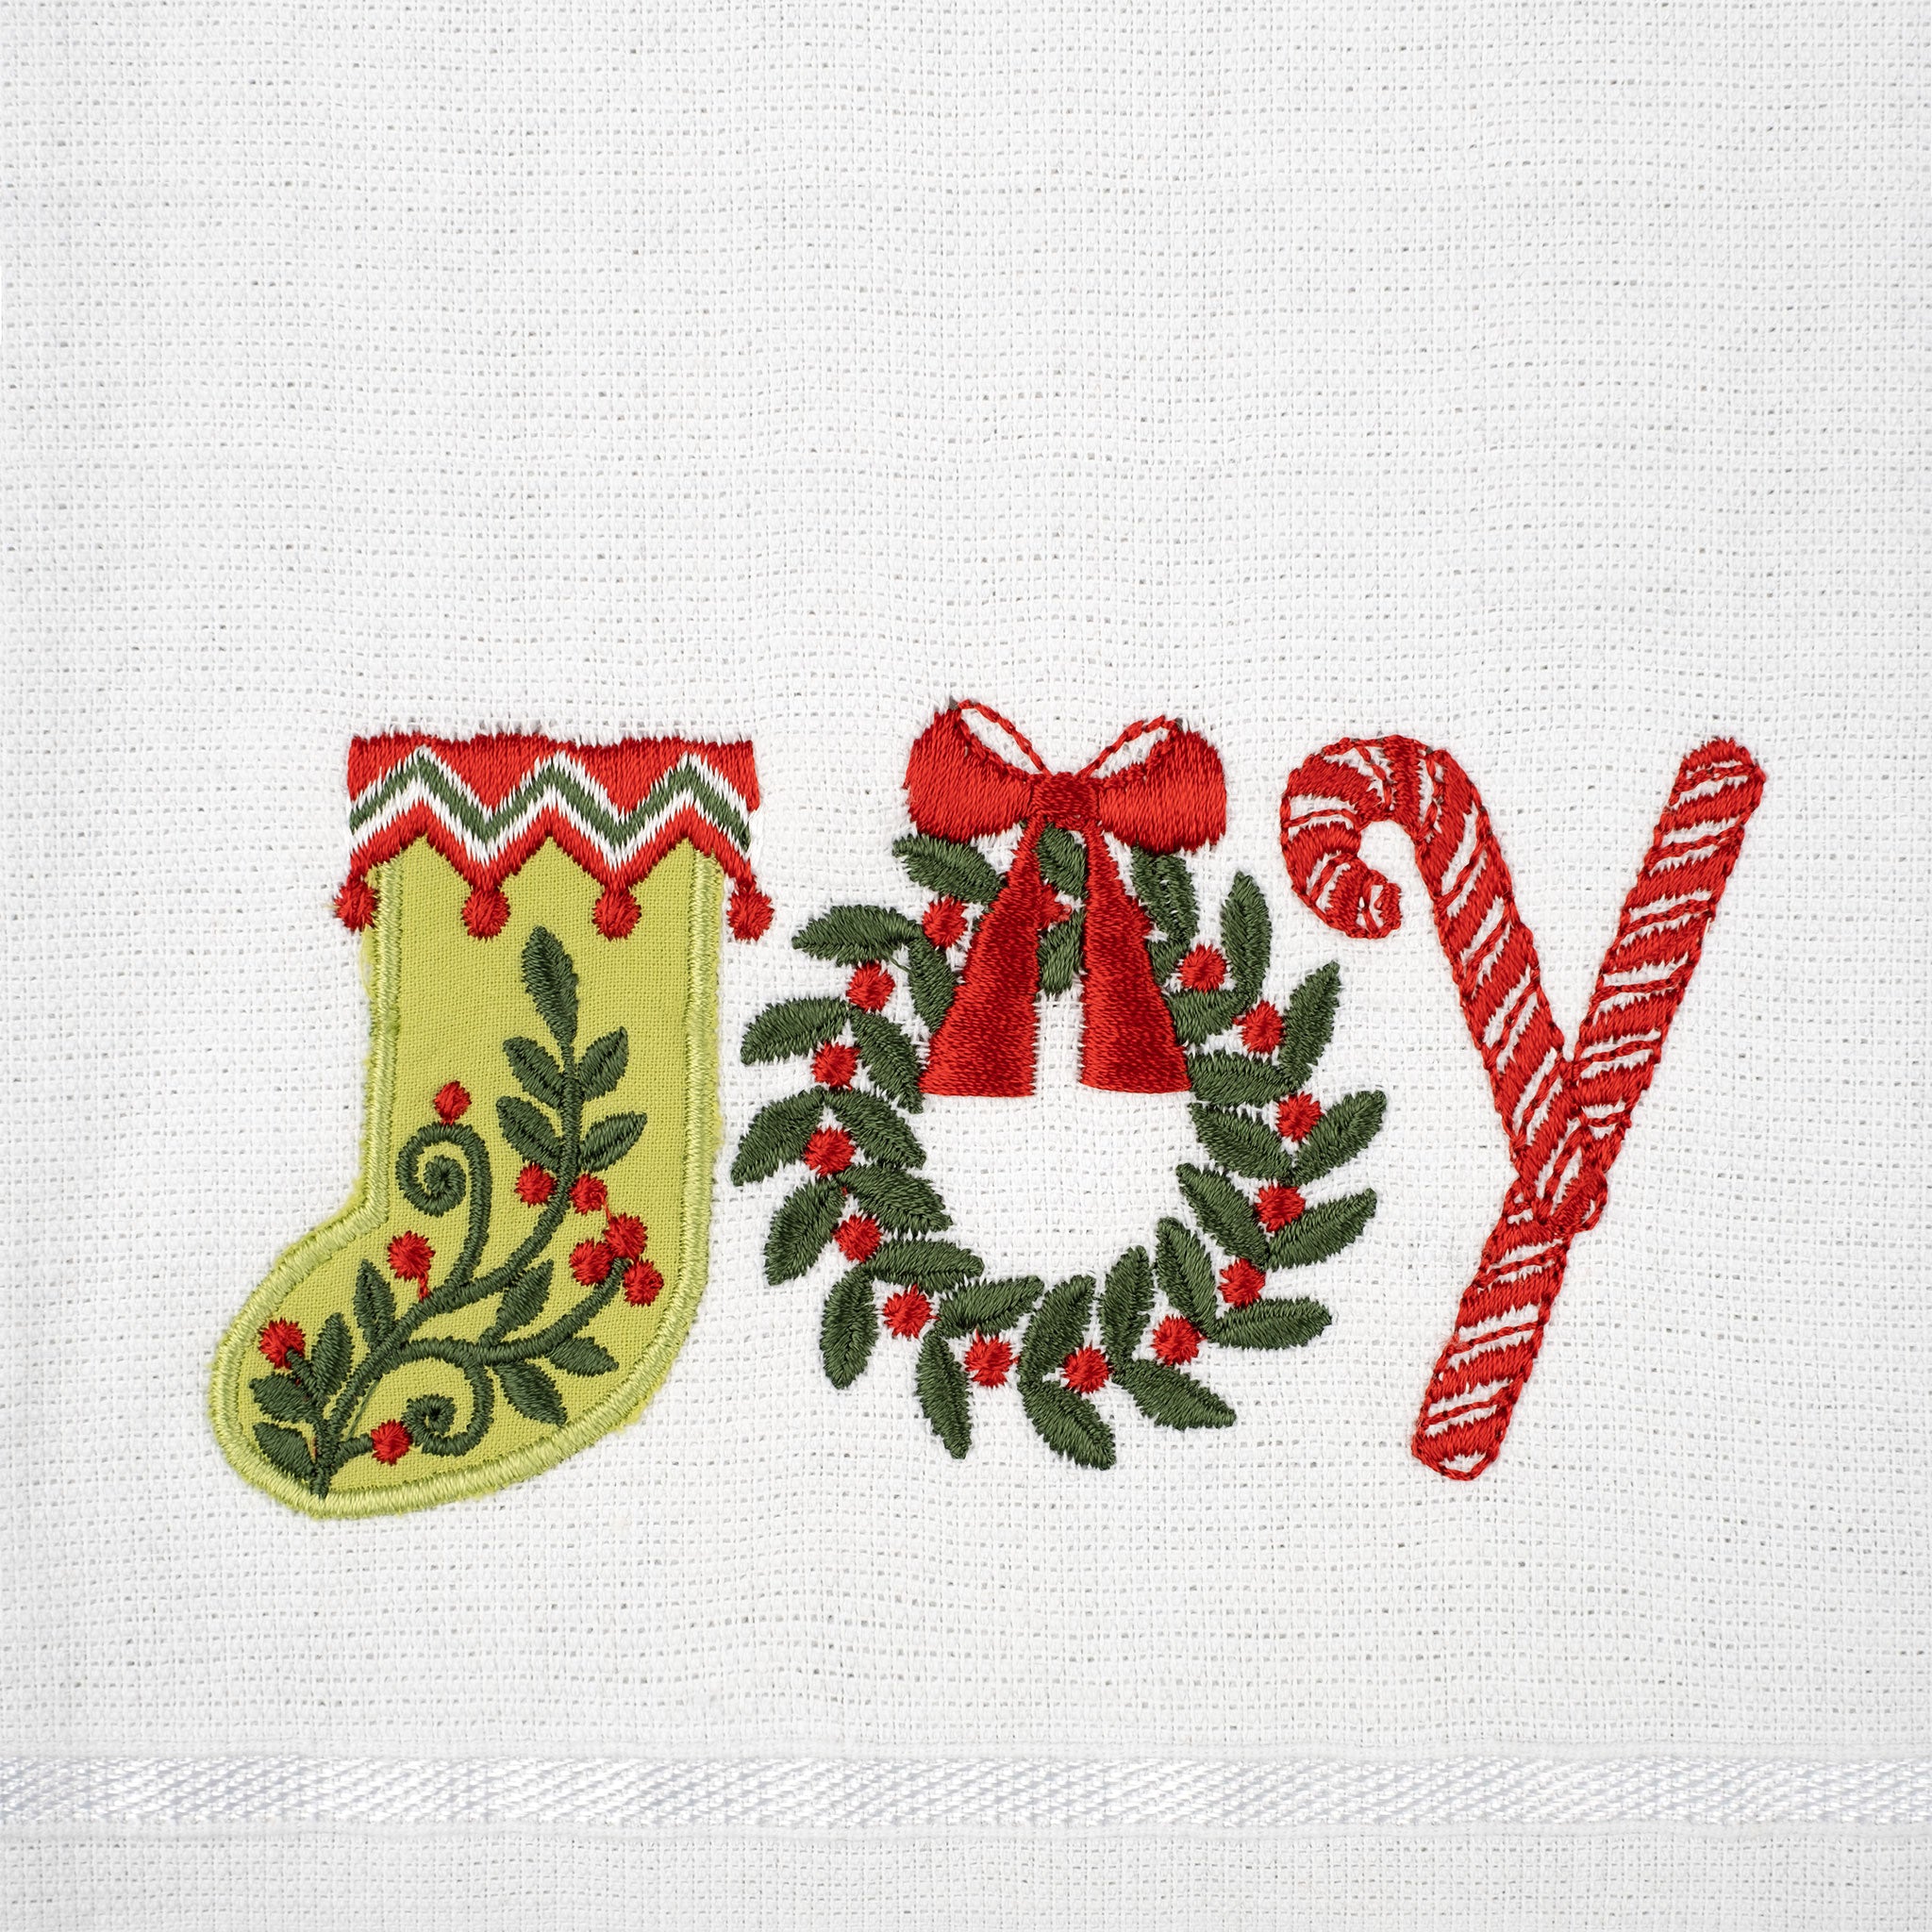  American Soft Linen - Christmas Towels Set 2 Packed Embroidered Turkish Cotton Hand Towels - Joy Lettering - 2